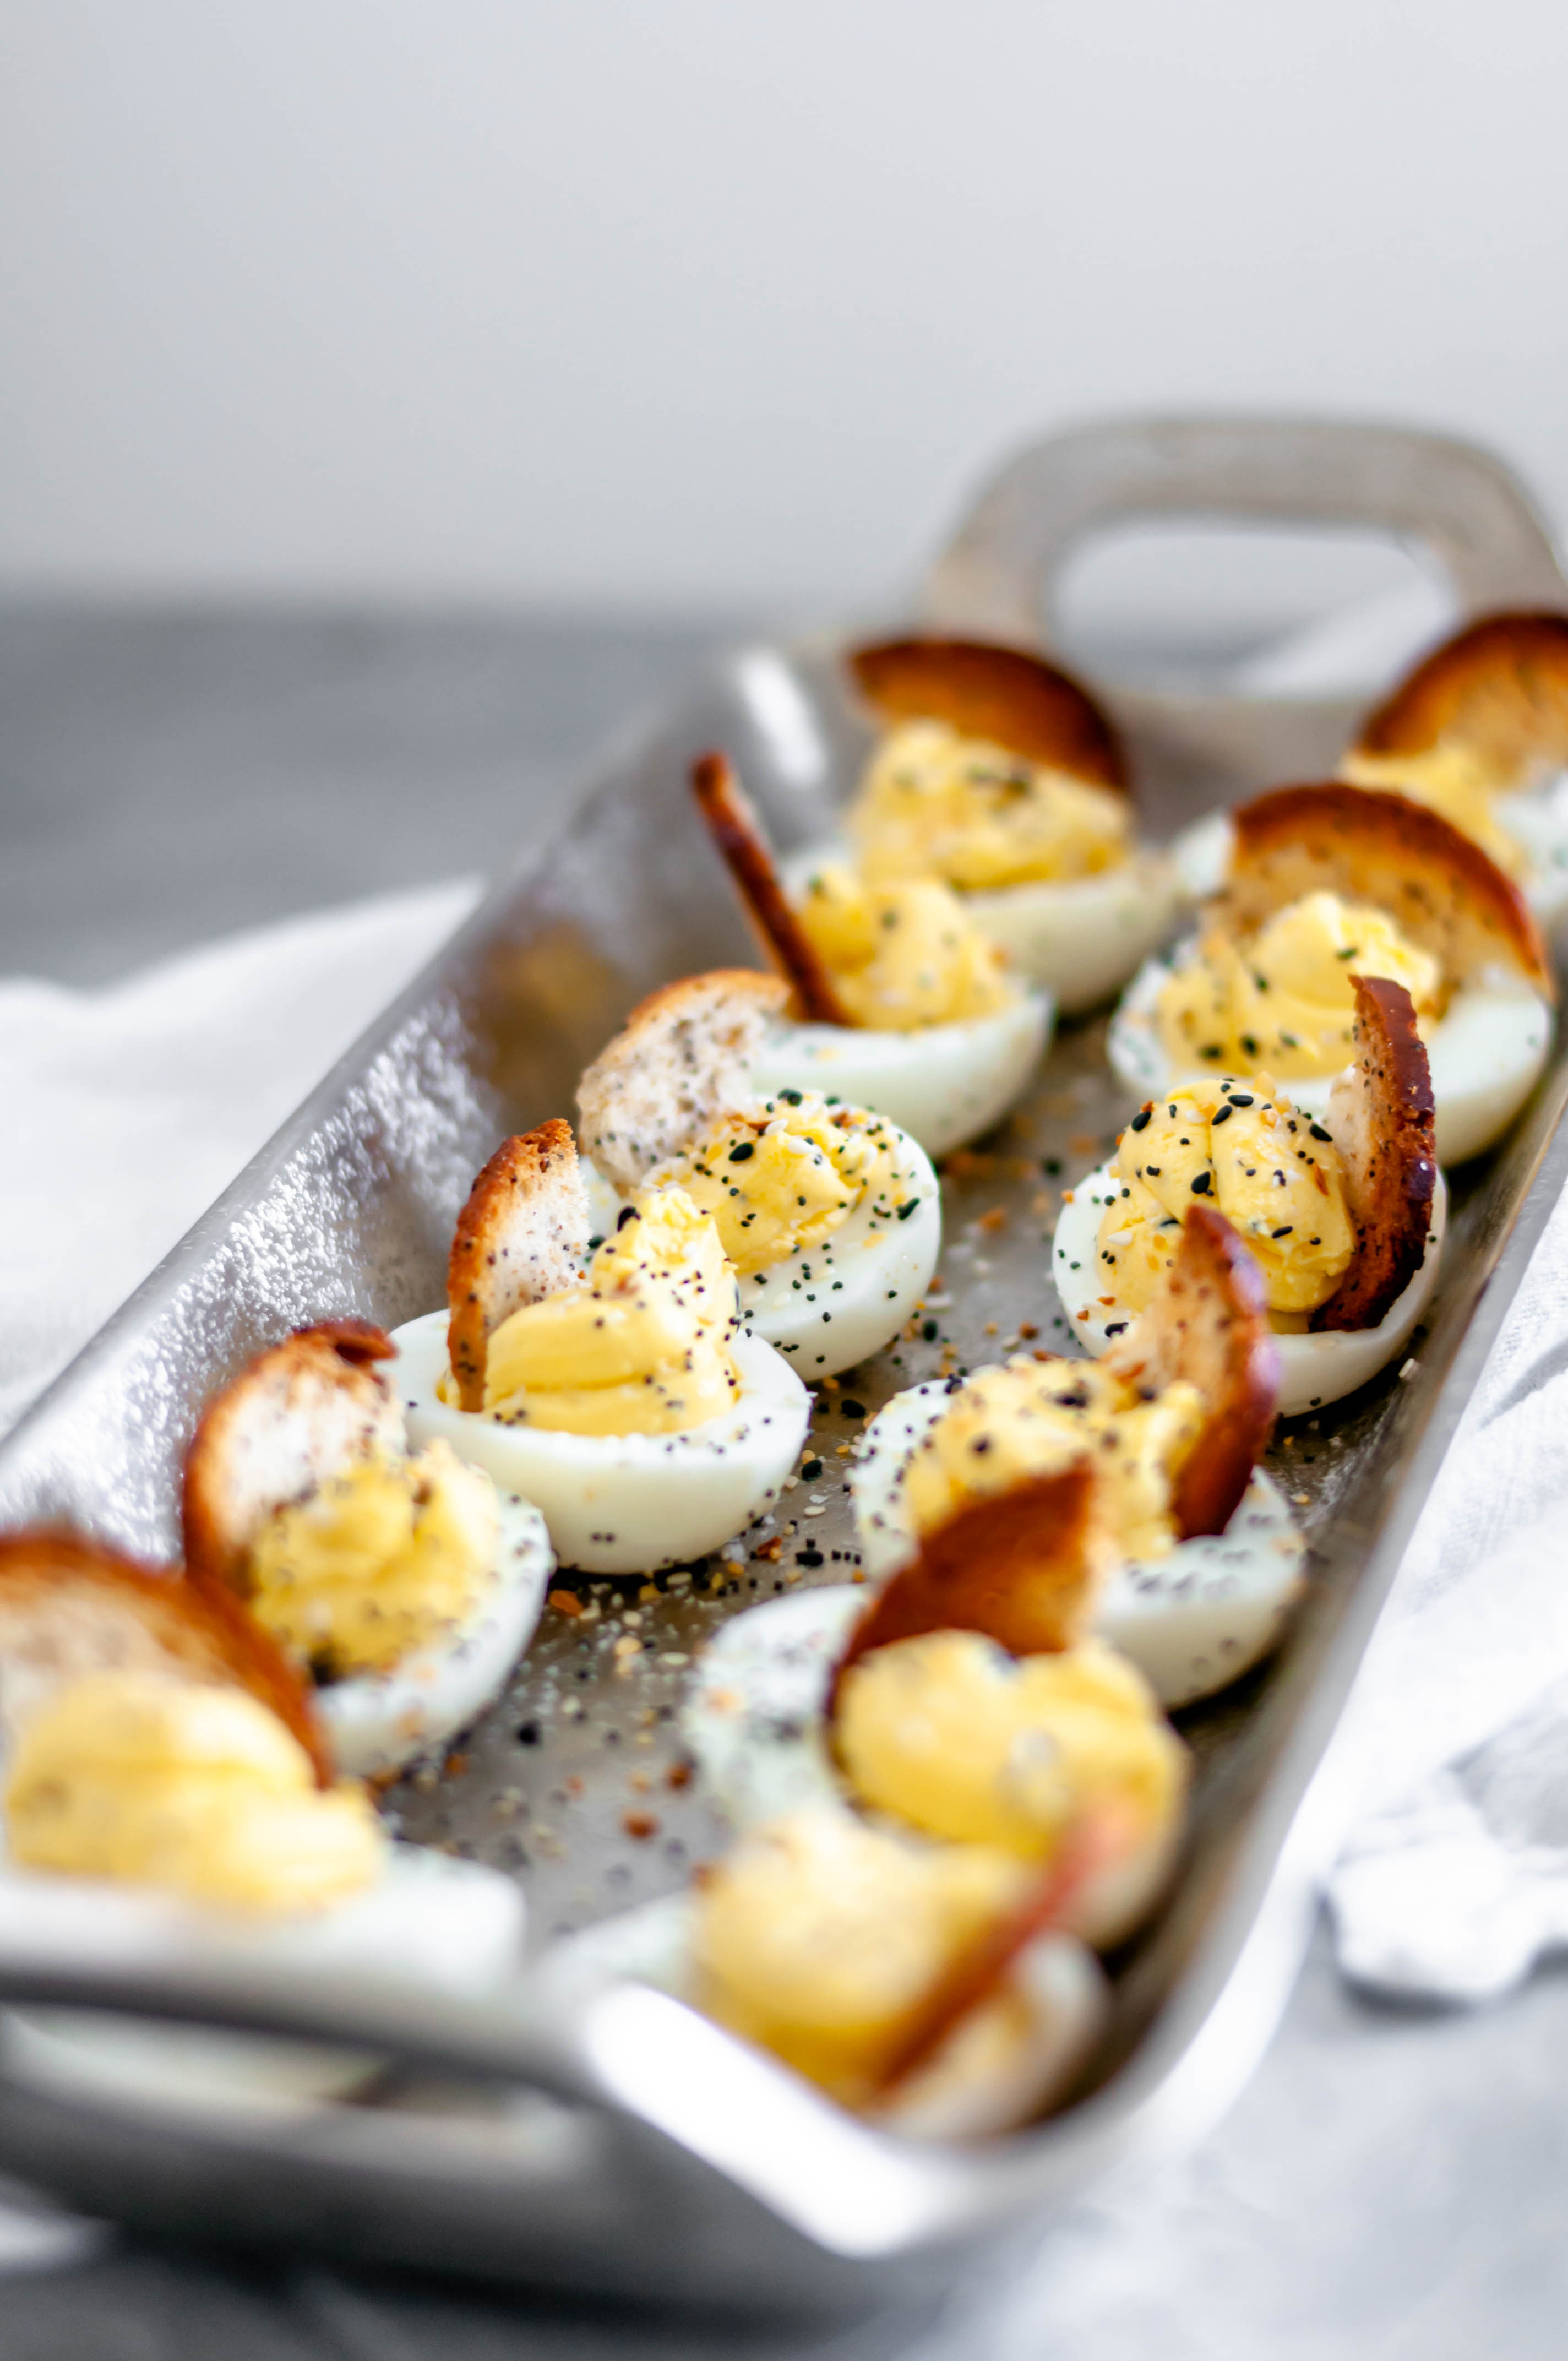 Everything Bagel Deviled Eggs are packed full of flavor. Cream cheese in the egg filling adds an extra creamy texture. Everything bagel seasoning adds tons of flavor. A bagel chip provides a nice crunch to the soft deviled egg.